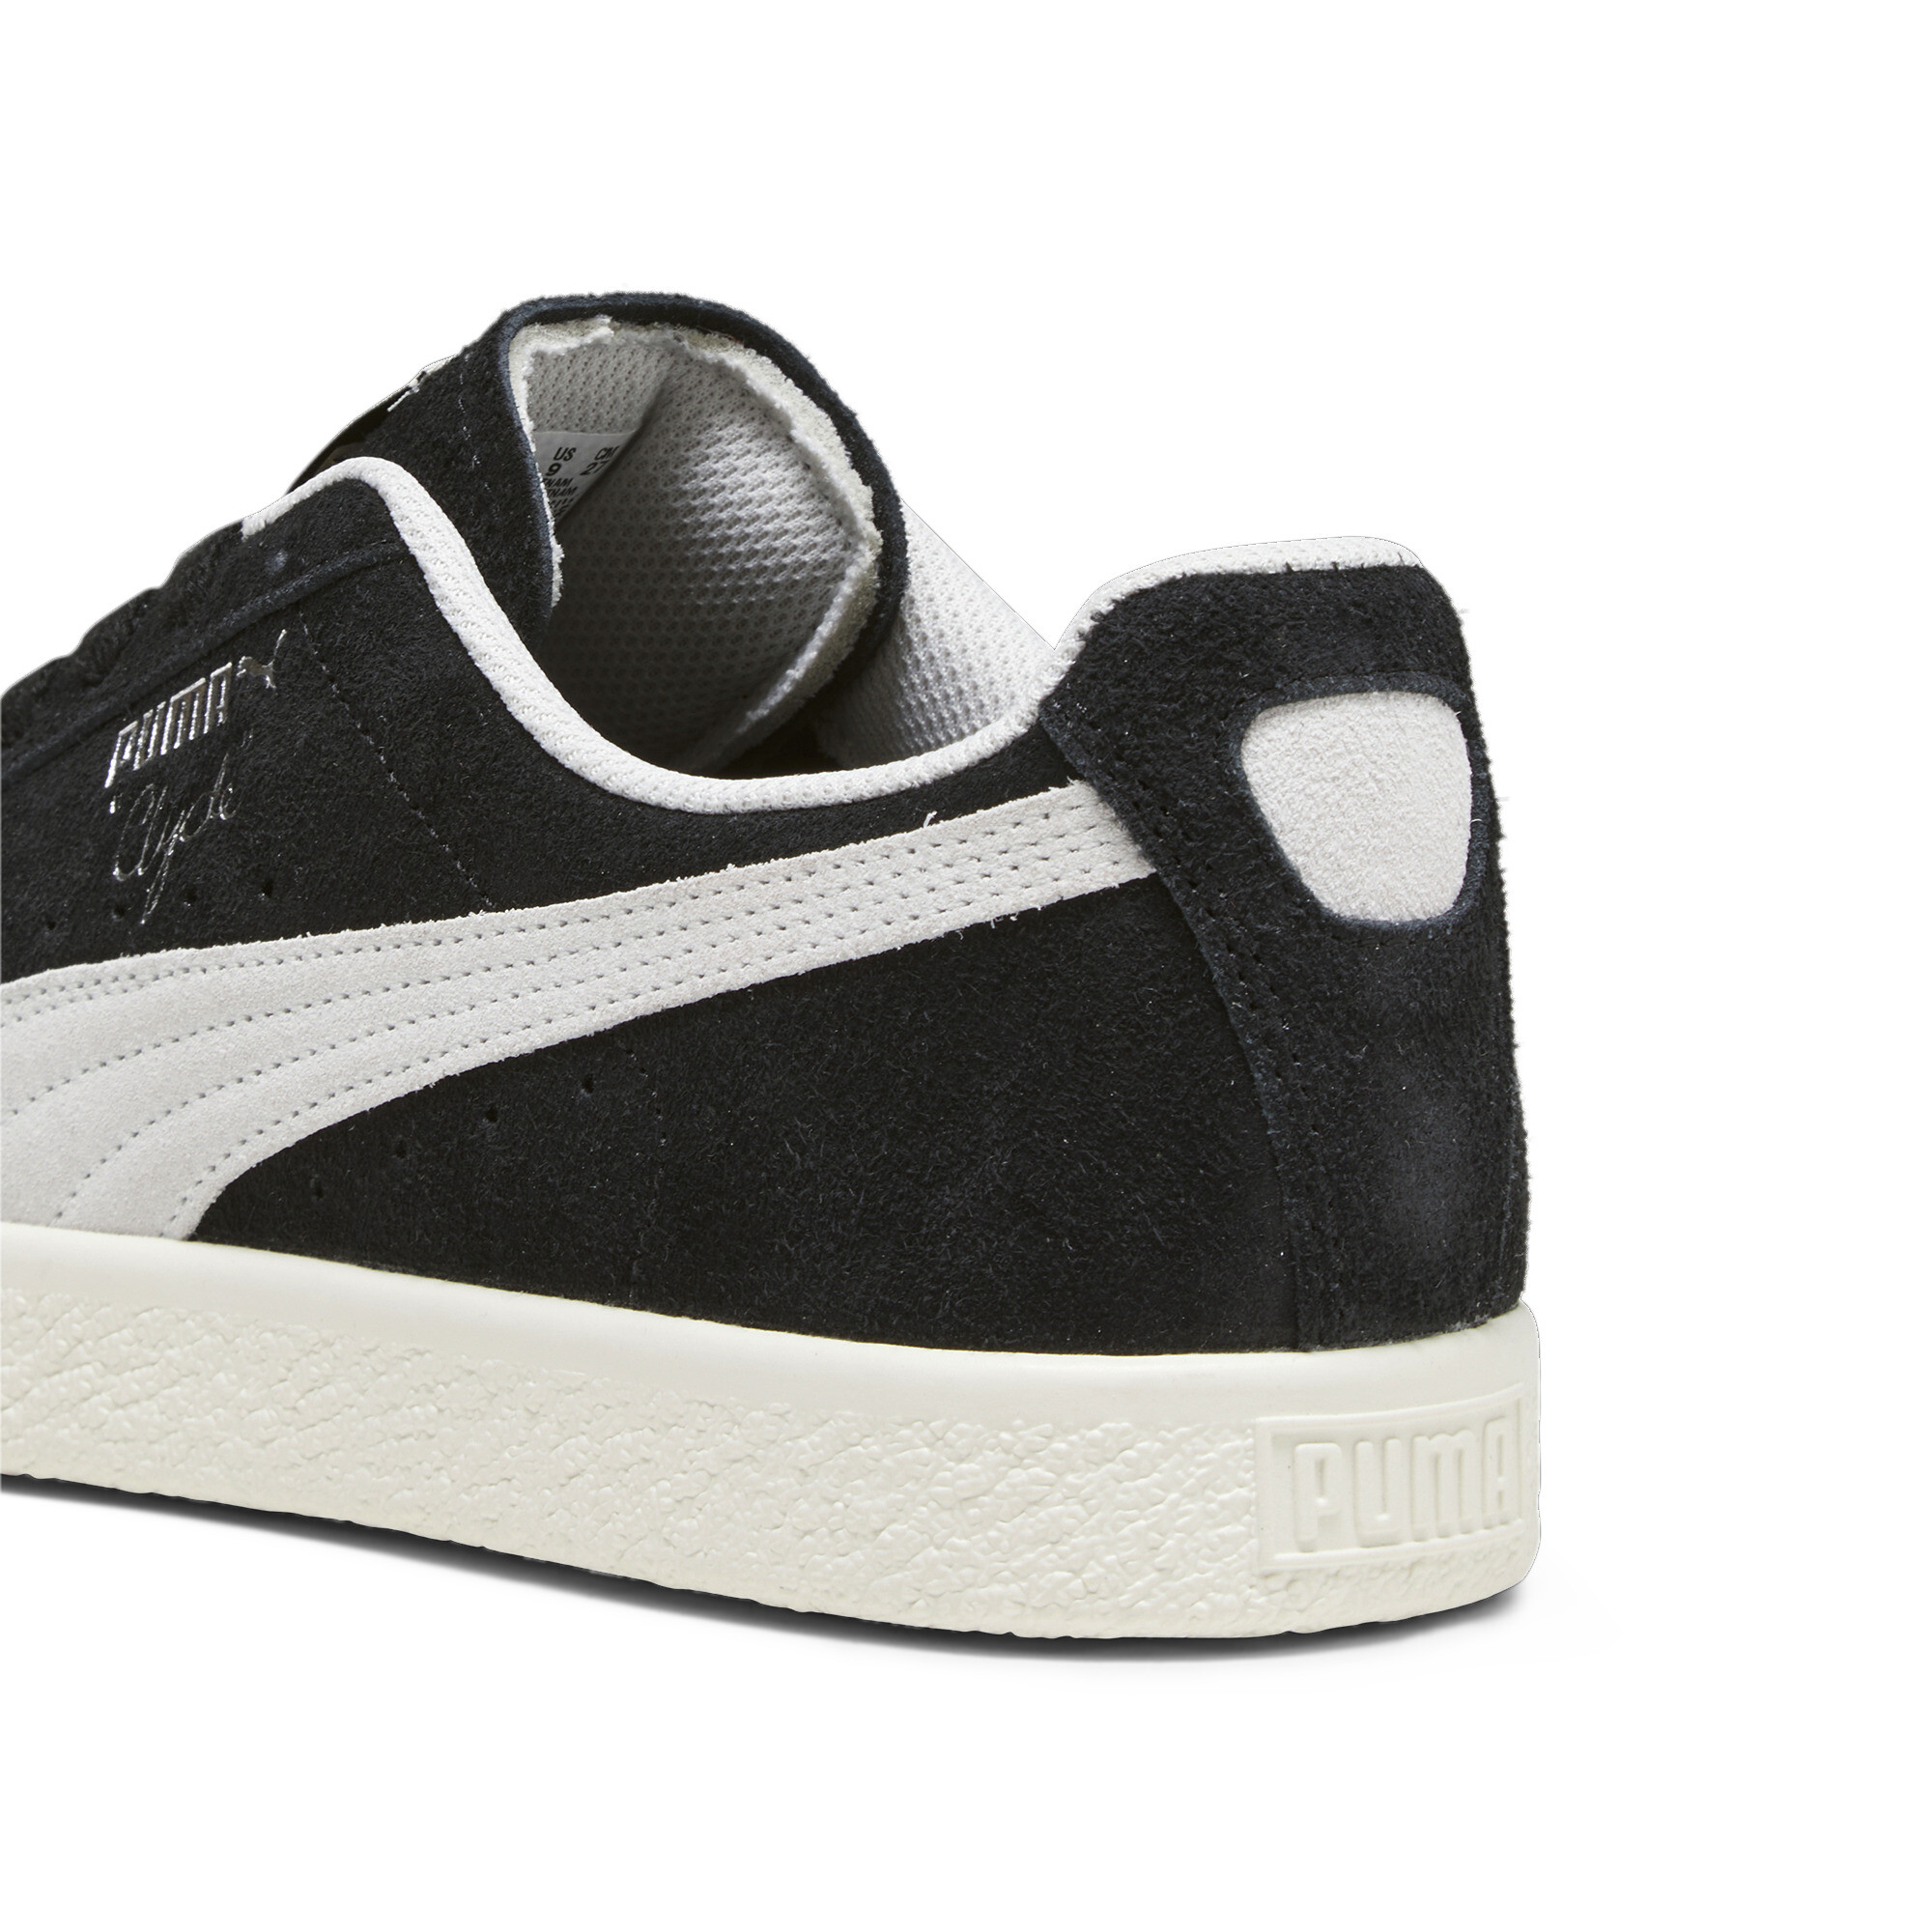 Men's PUMA Clyde Hairy Suede Sneakers In Black, Size EU 42